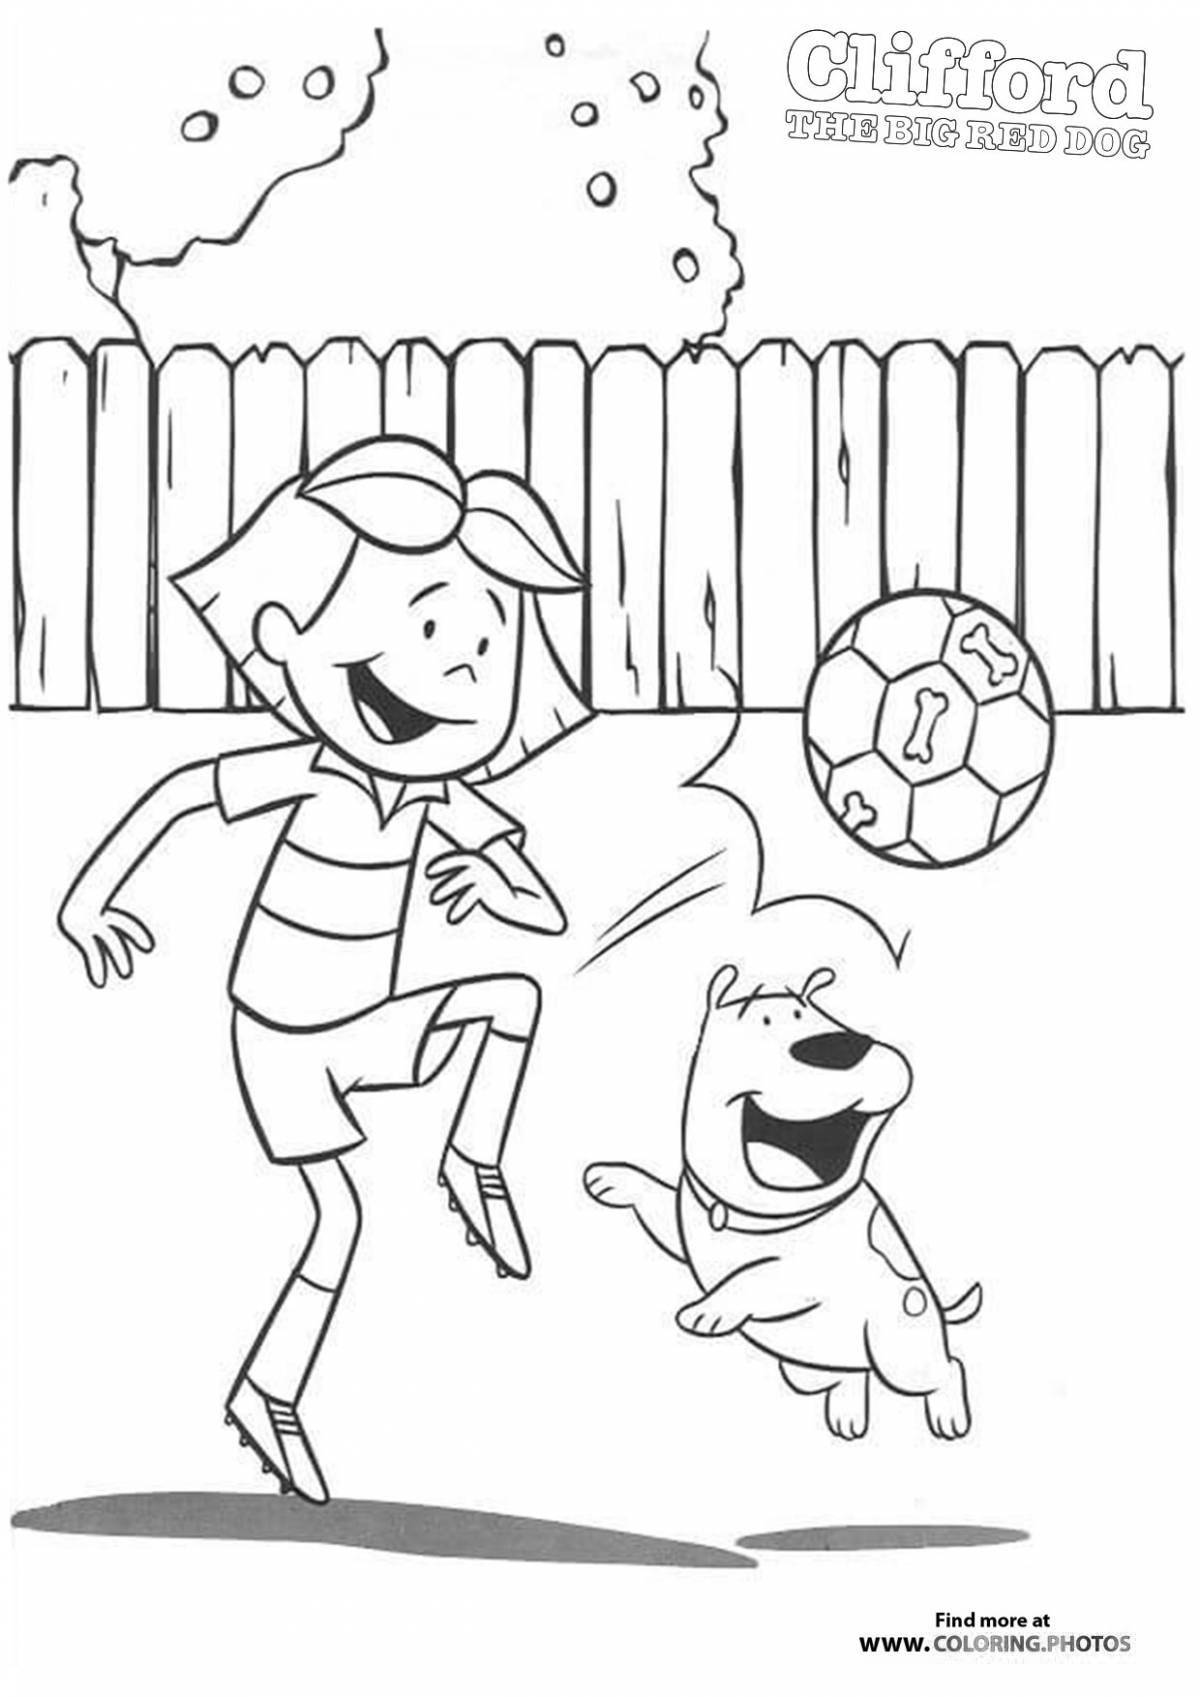 Coloring page adorable red friend